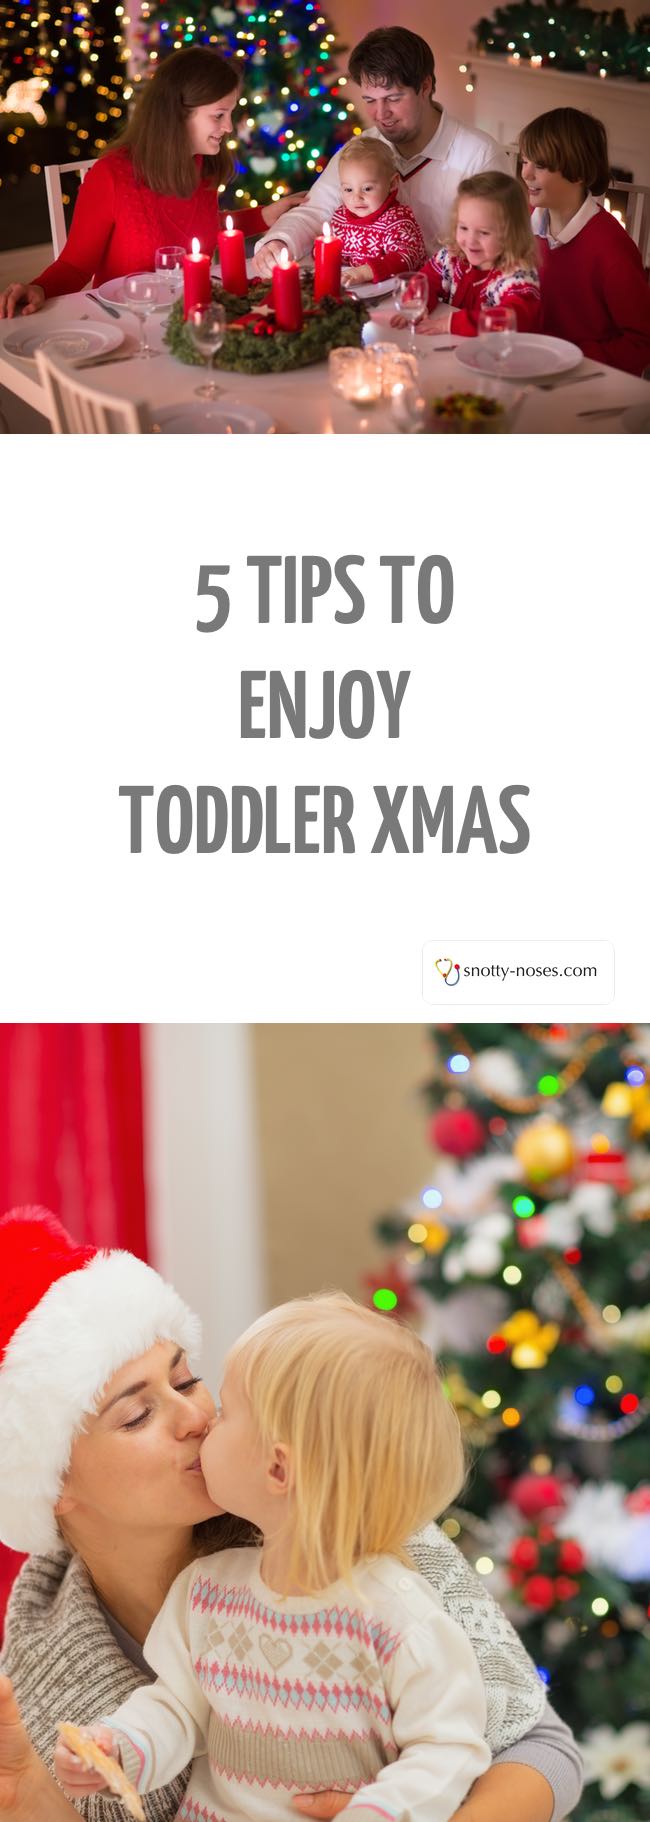 5 Tips to Enjoy Christmas With Your Toddler. Christmas is such an exciting time for toddlers but when routines go out the window, it can be really stressful. Some easy and simple strategies to help you stay on track and enjoy your toddler christmas